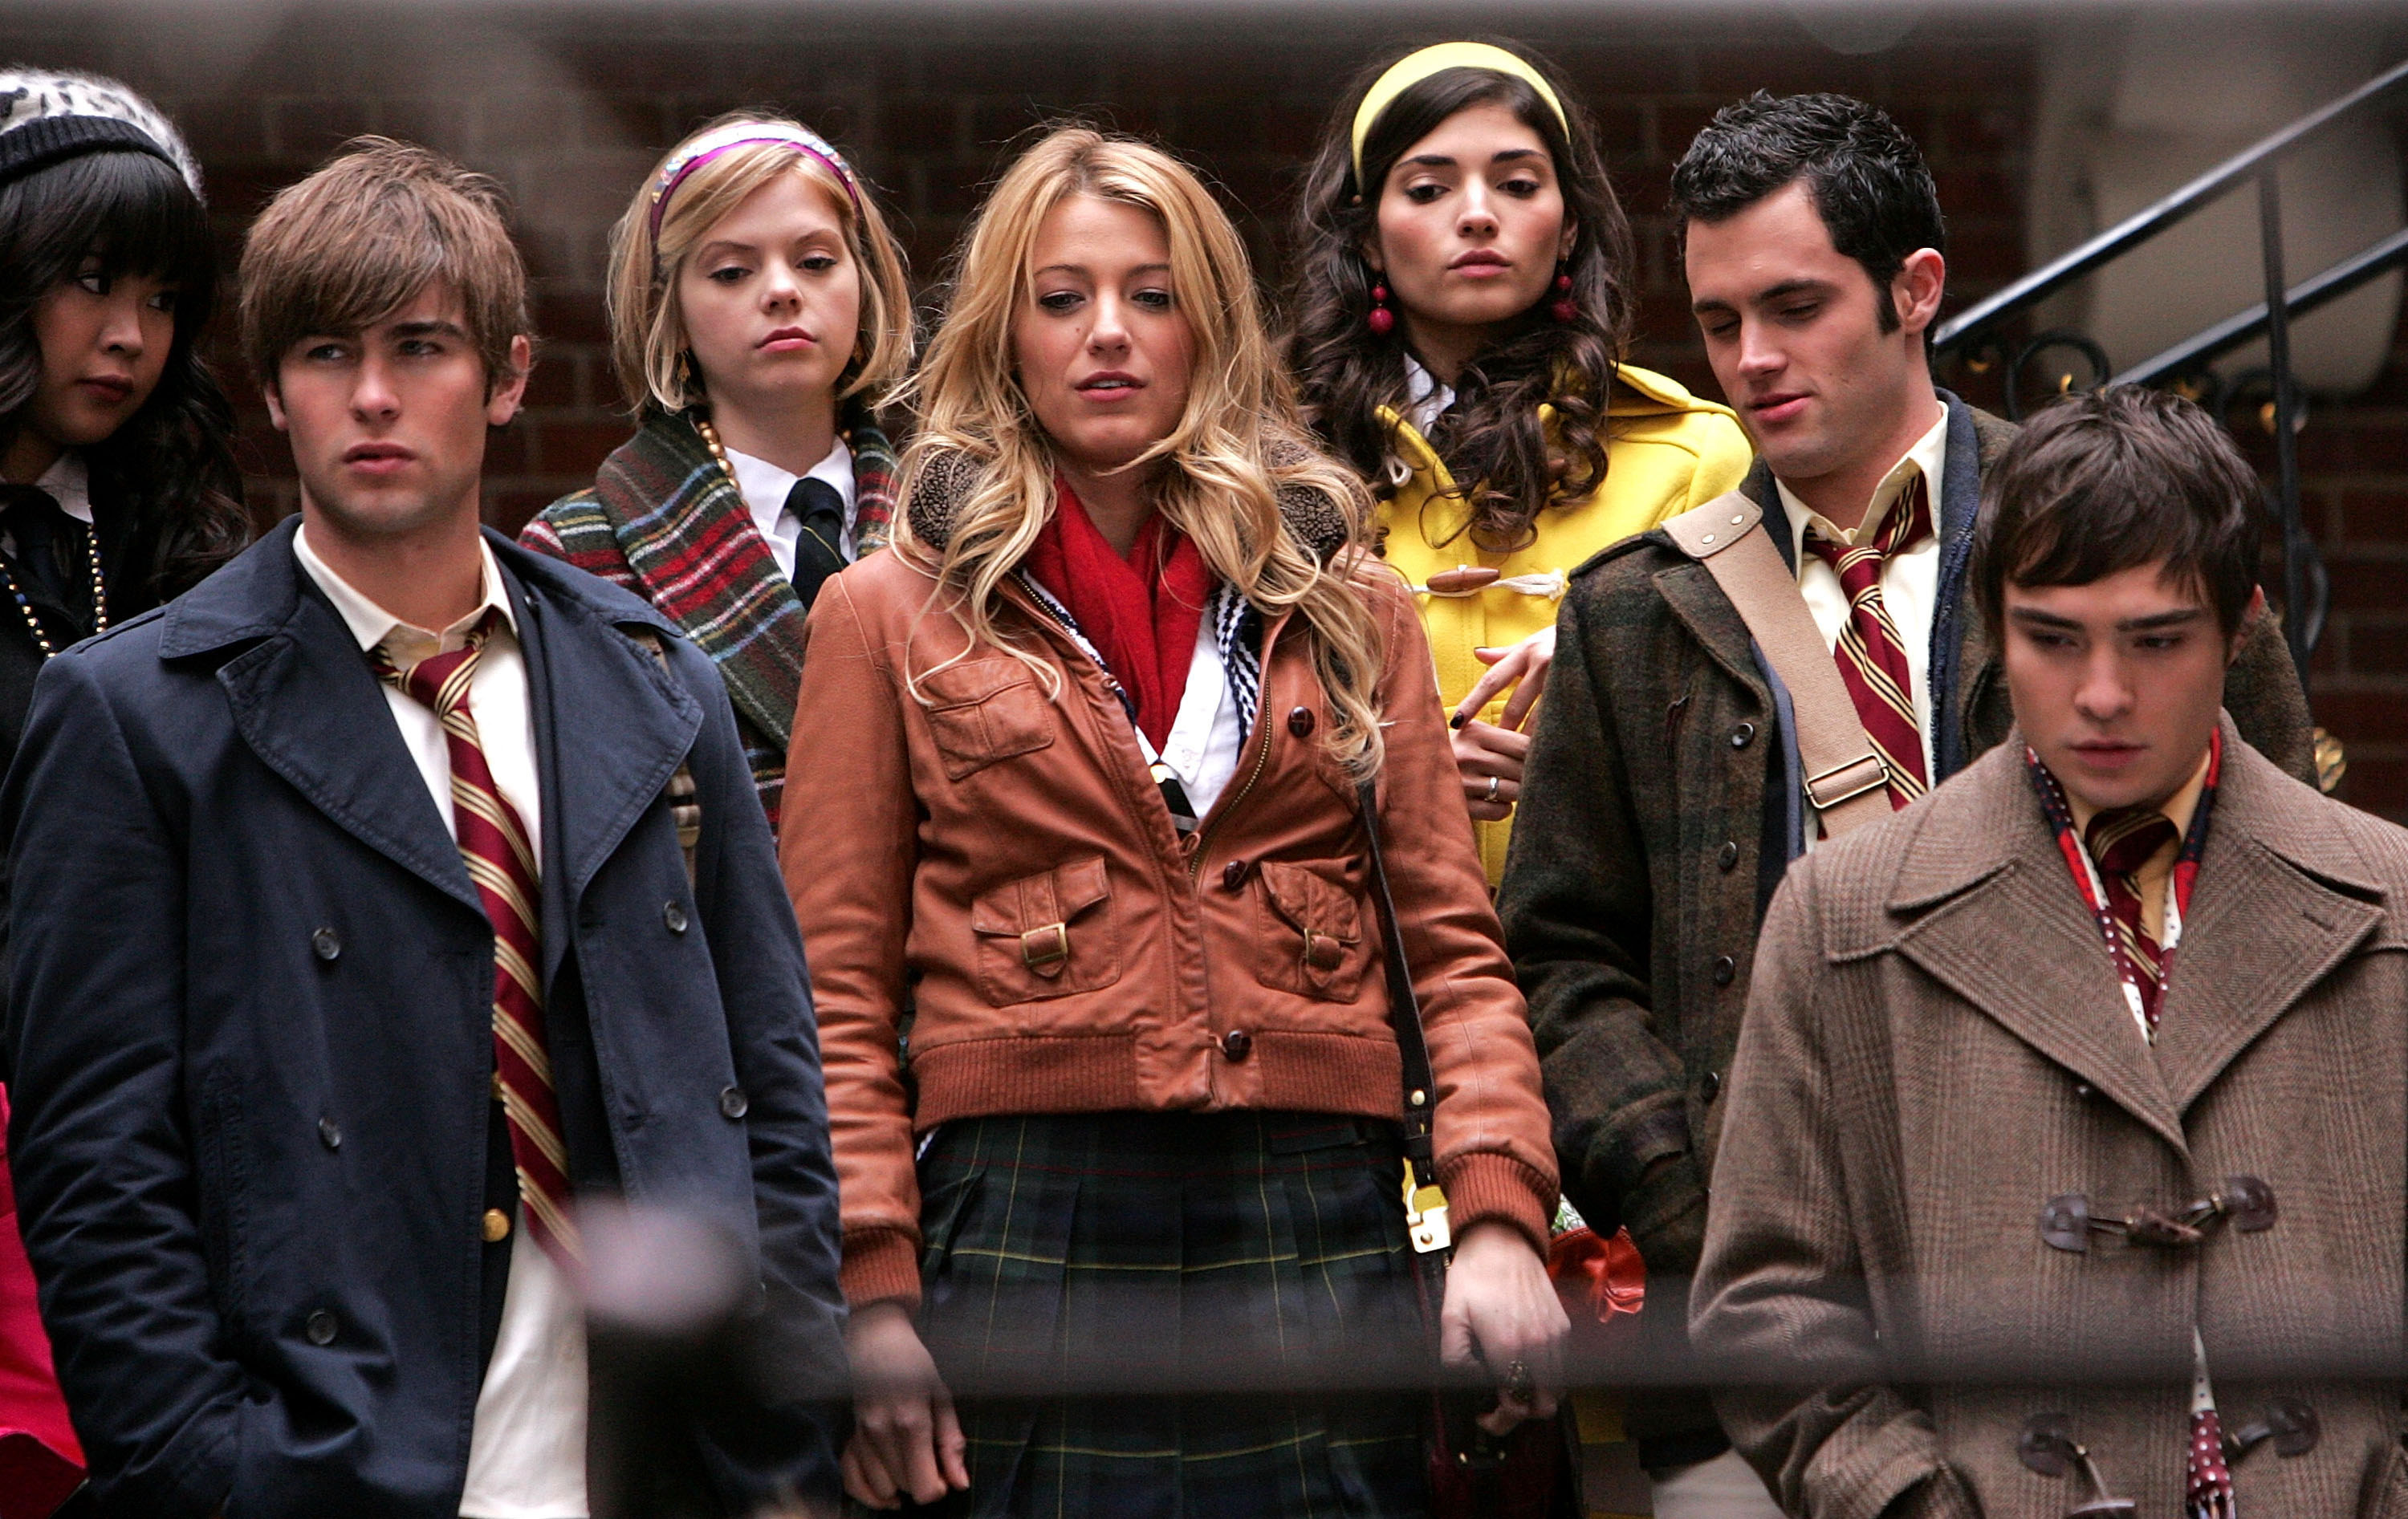 Chace Crawford, Blake Lively, Penn Badgley, and Ed Westwick